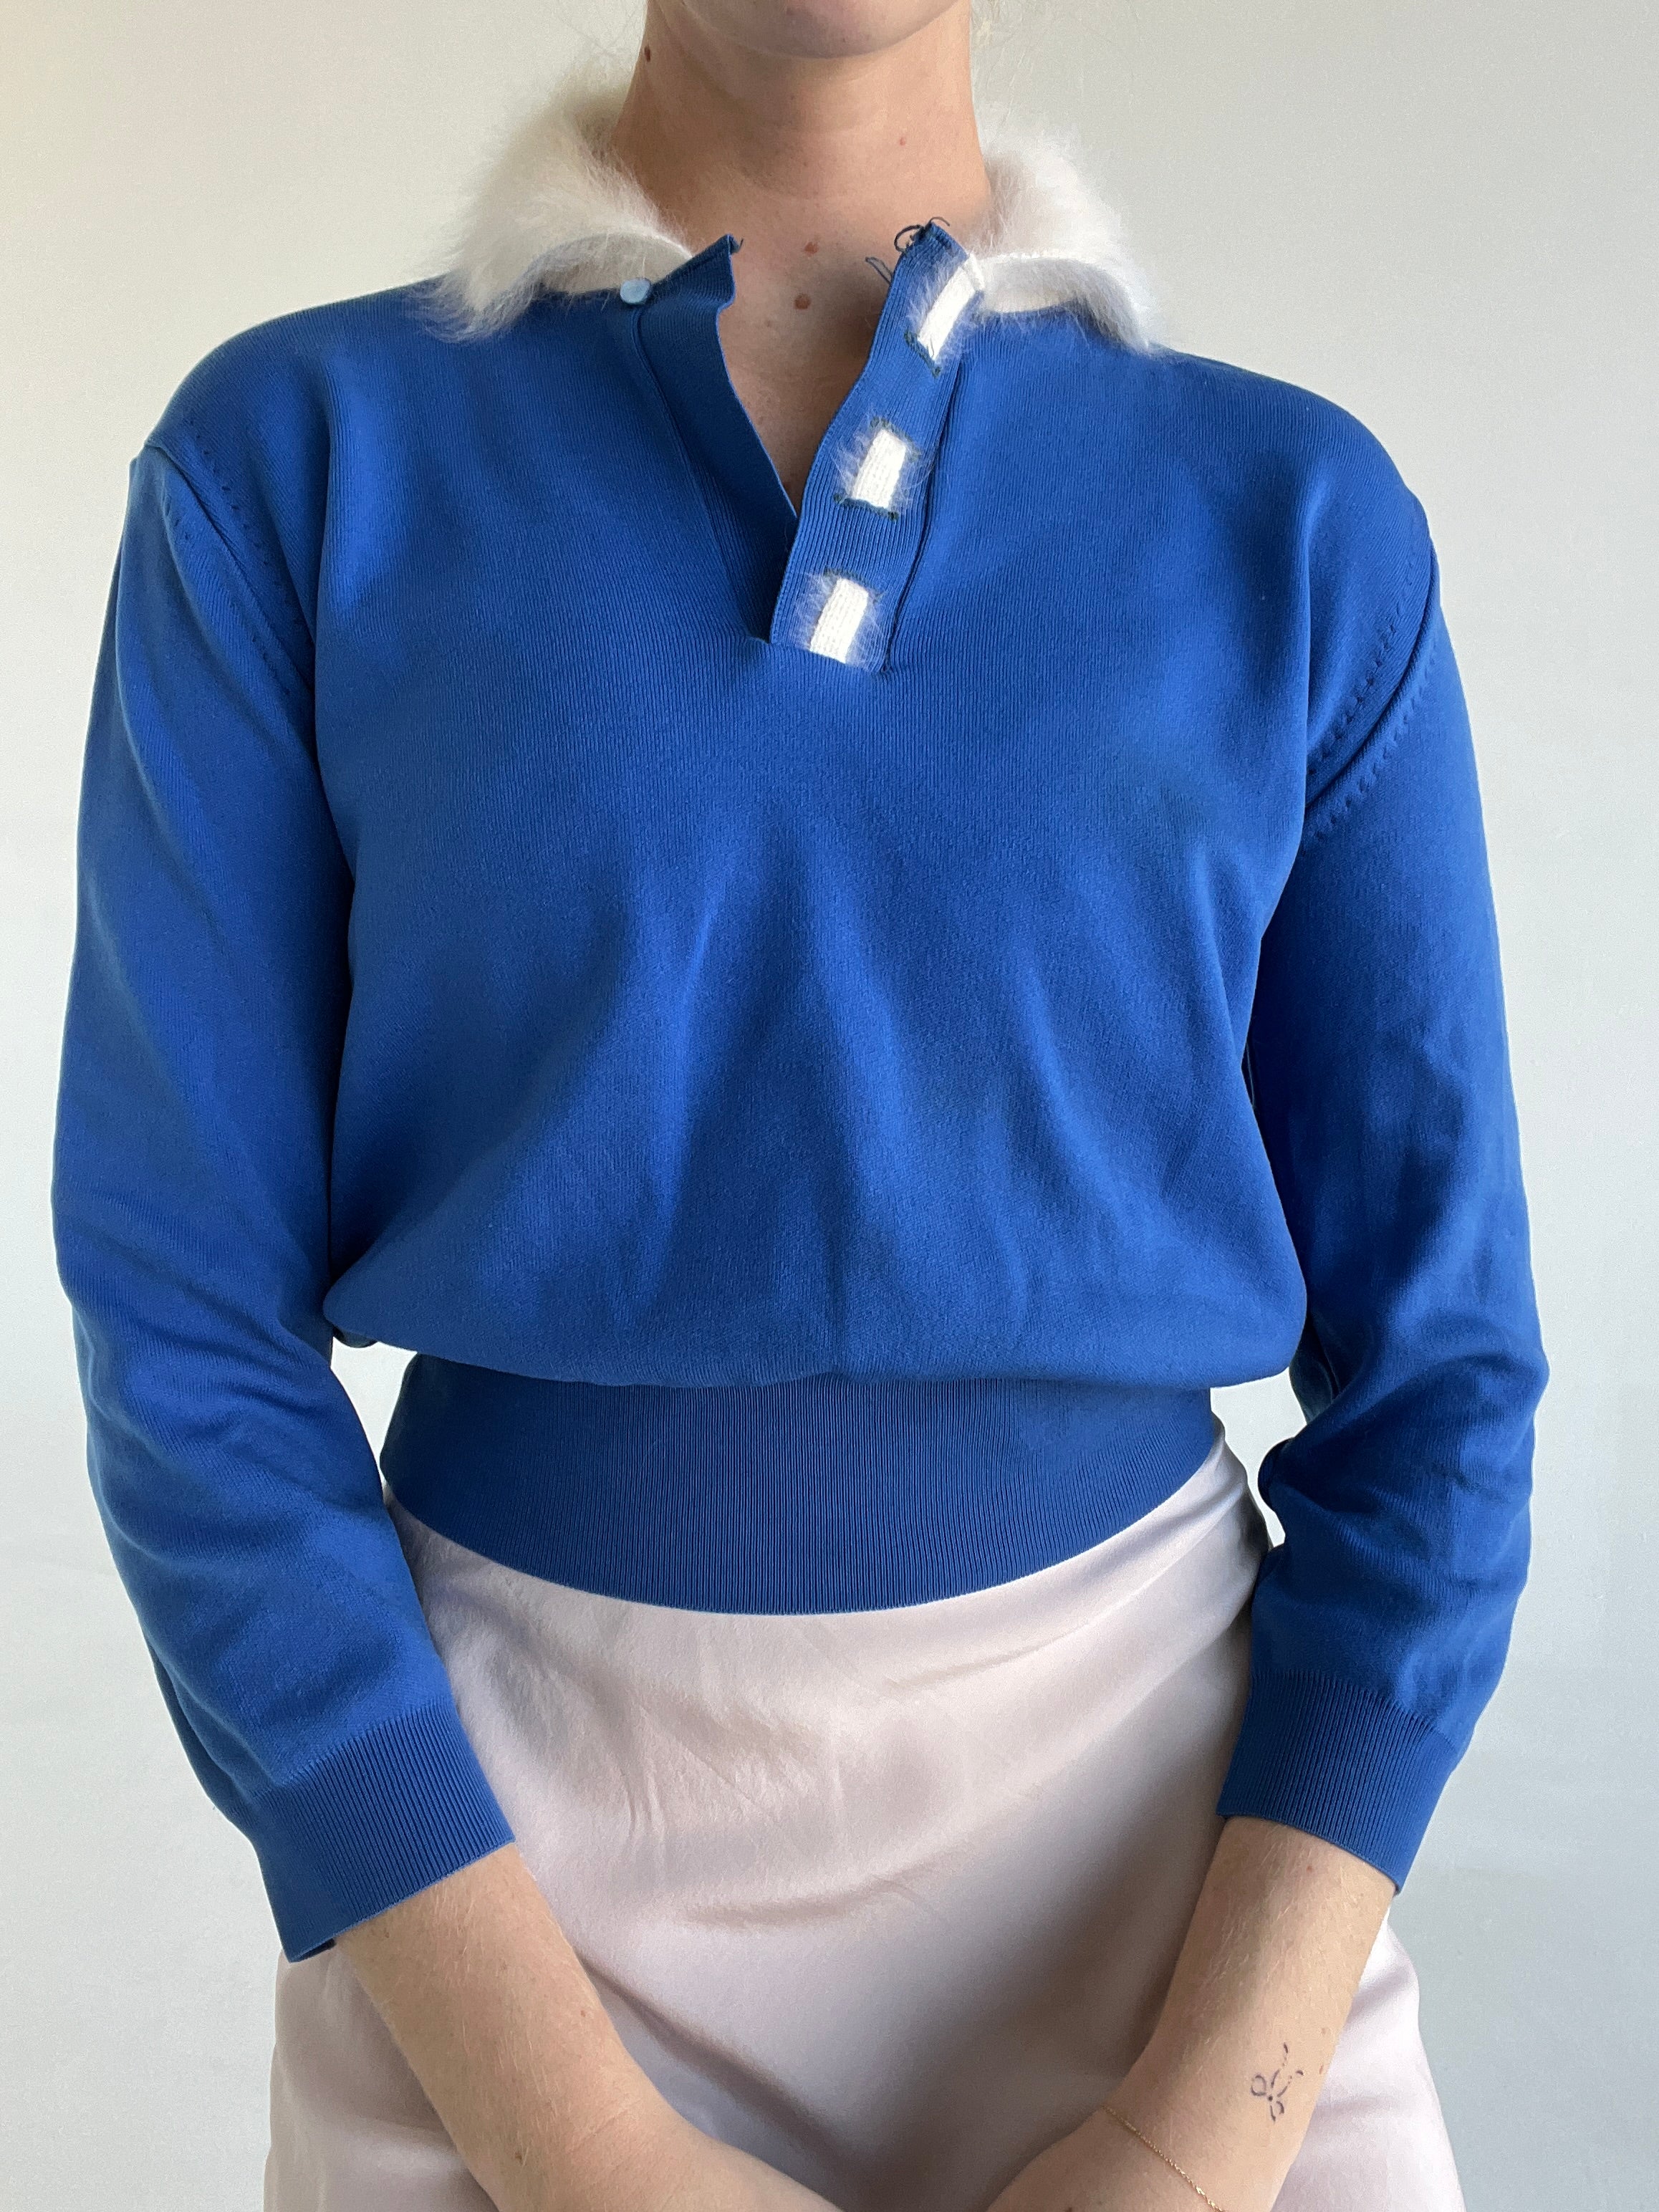 1950's Royal Blue Sweater with White Angora Collar